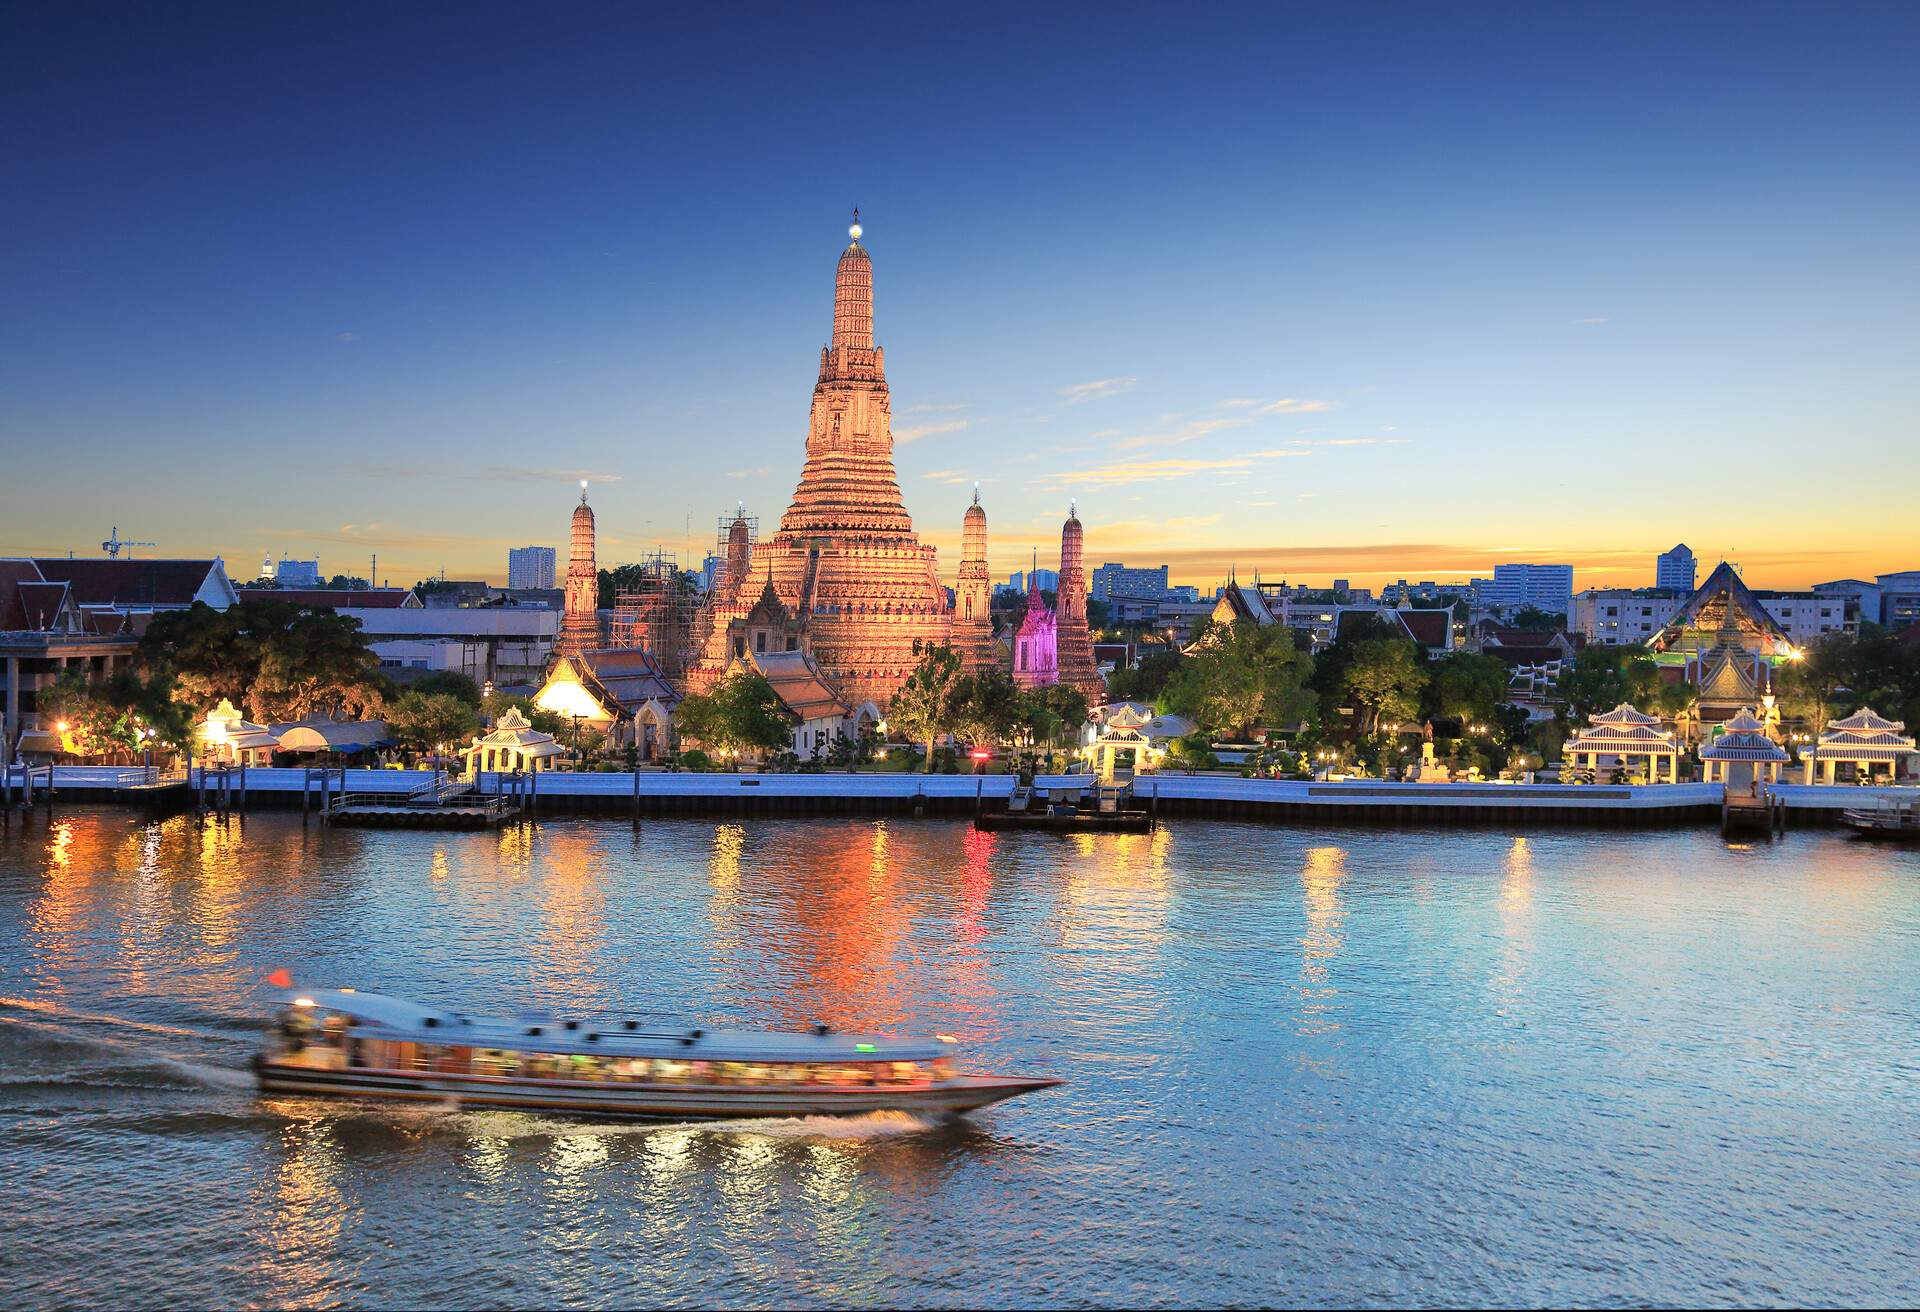 Wat Arun and cruise ship in twilight time, Bangkok, Thailand, on the Thonburi west bank of the Chao Phraya River.